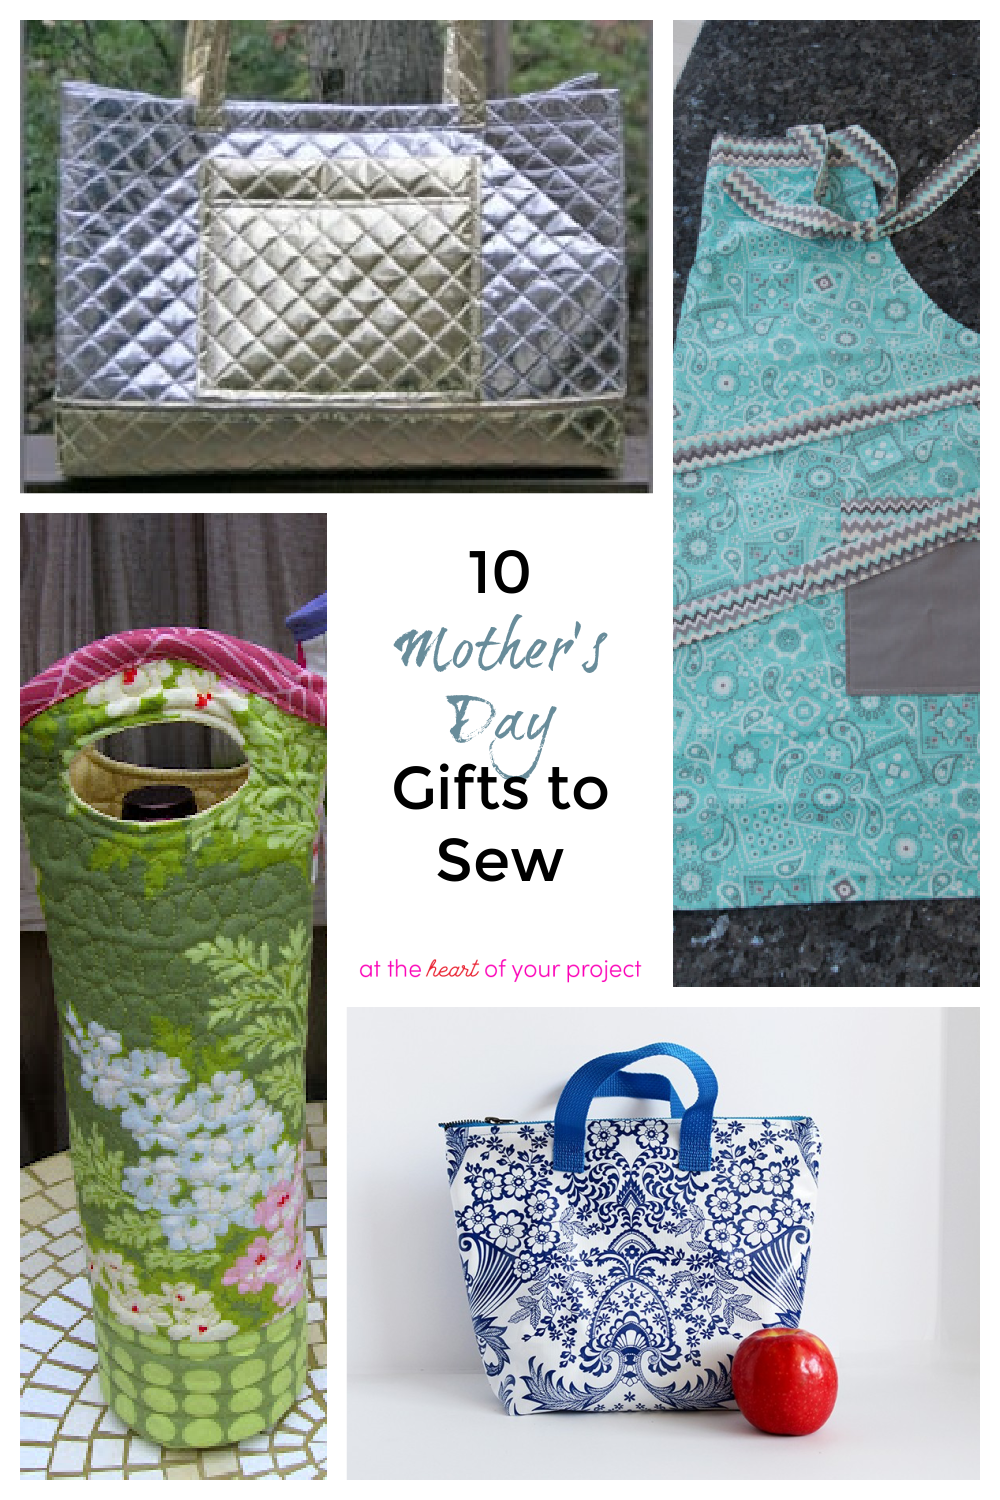 ten mother's day gifts to sew